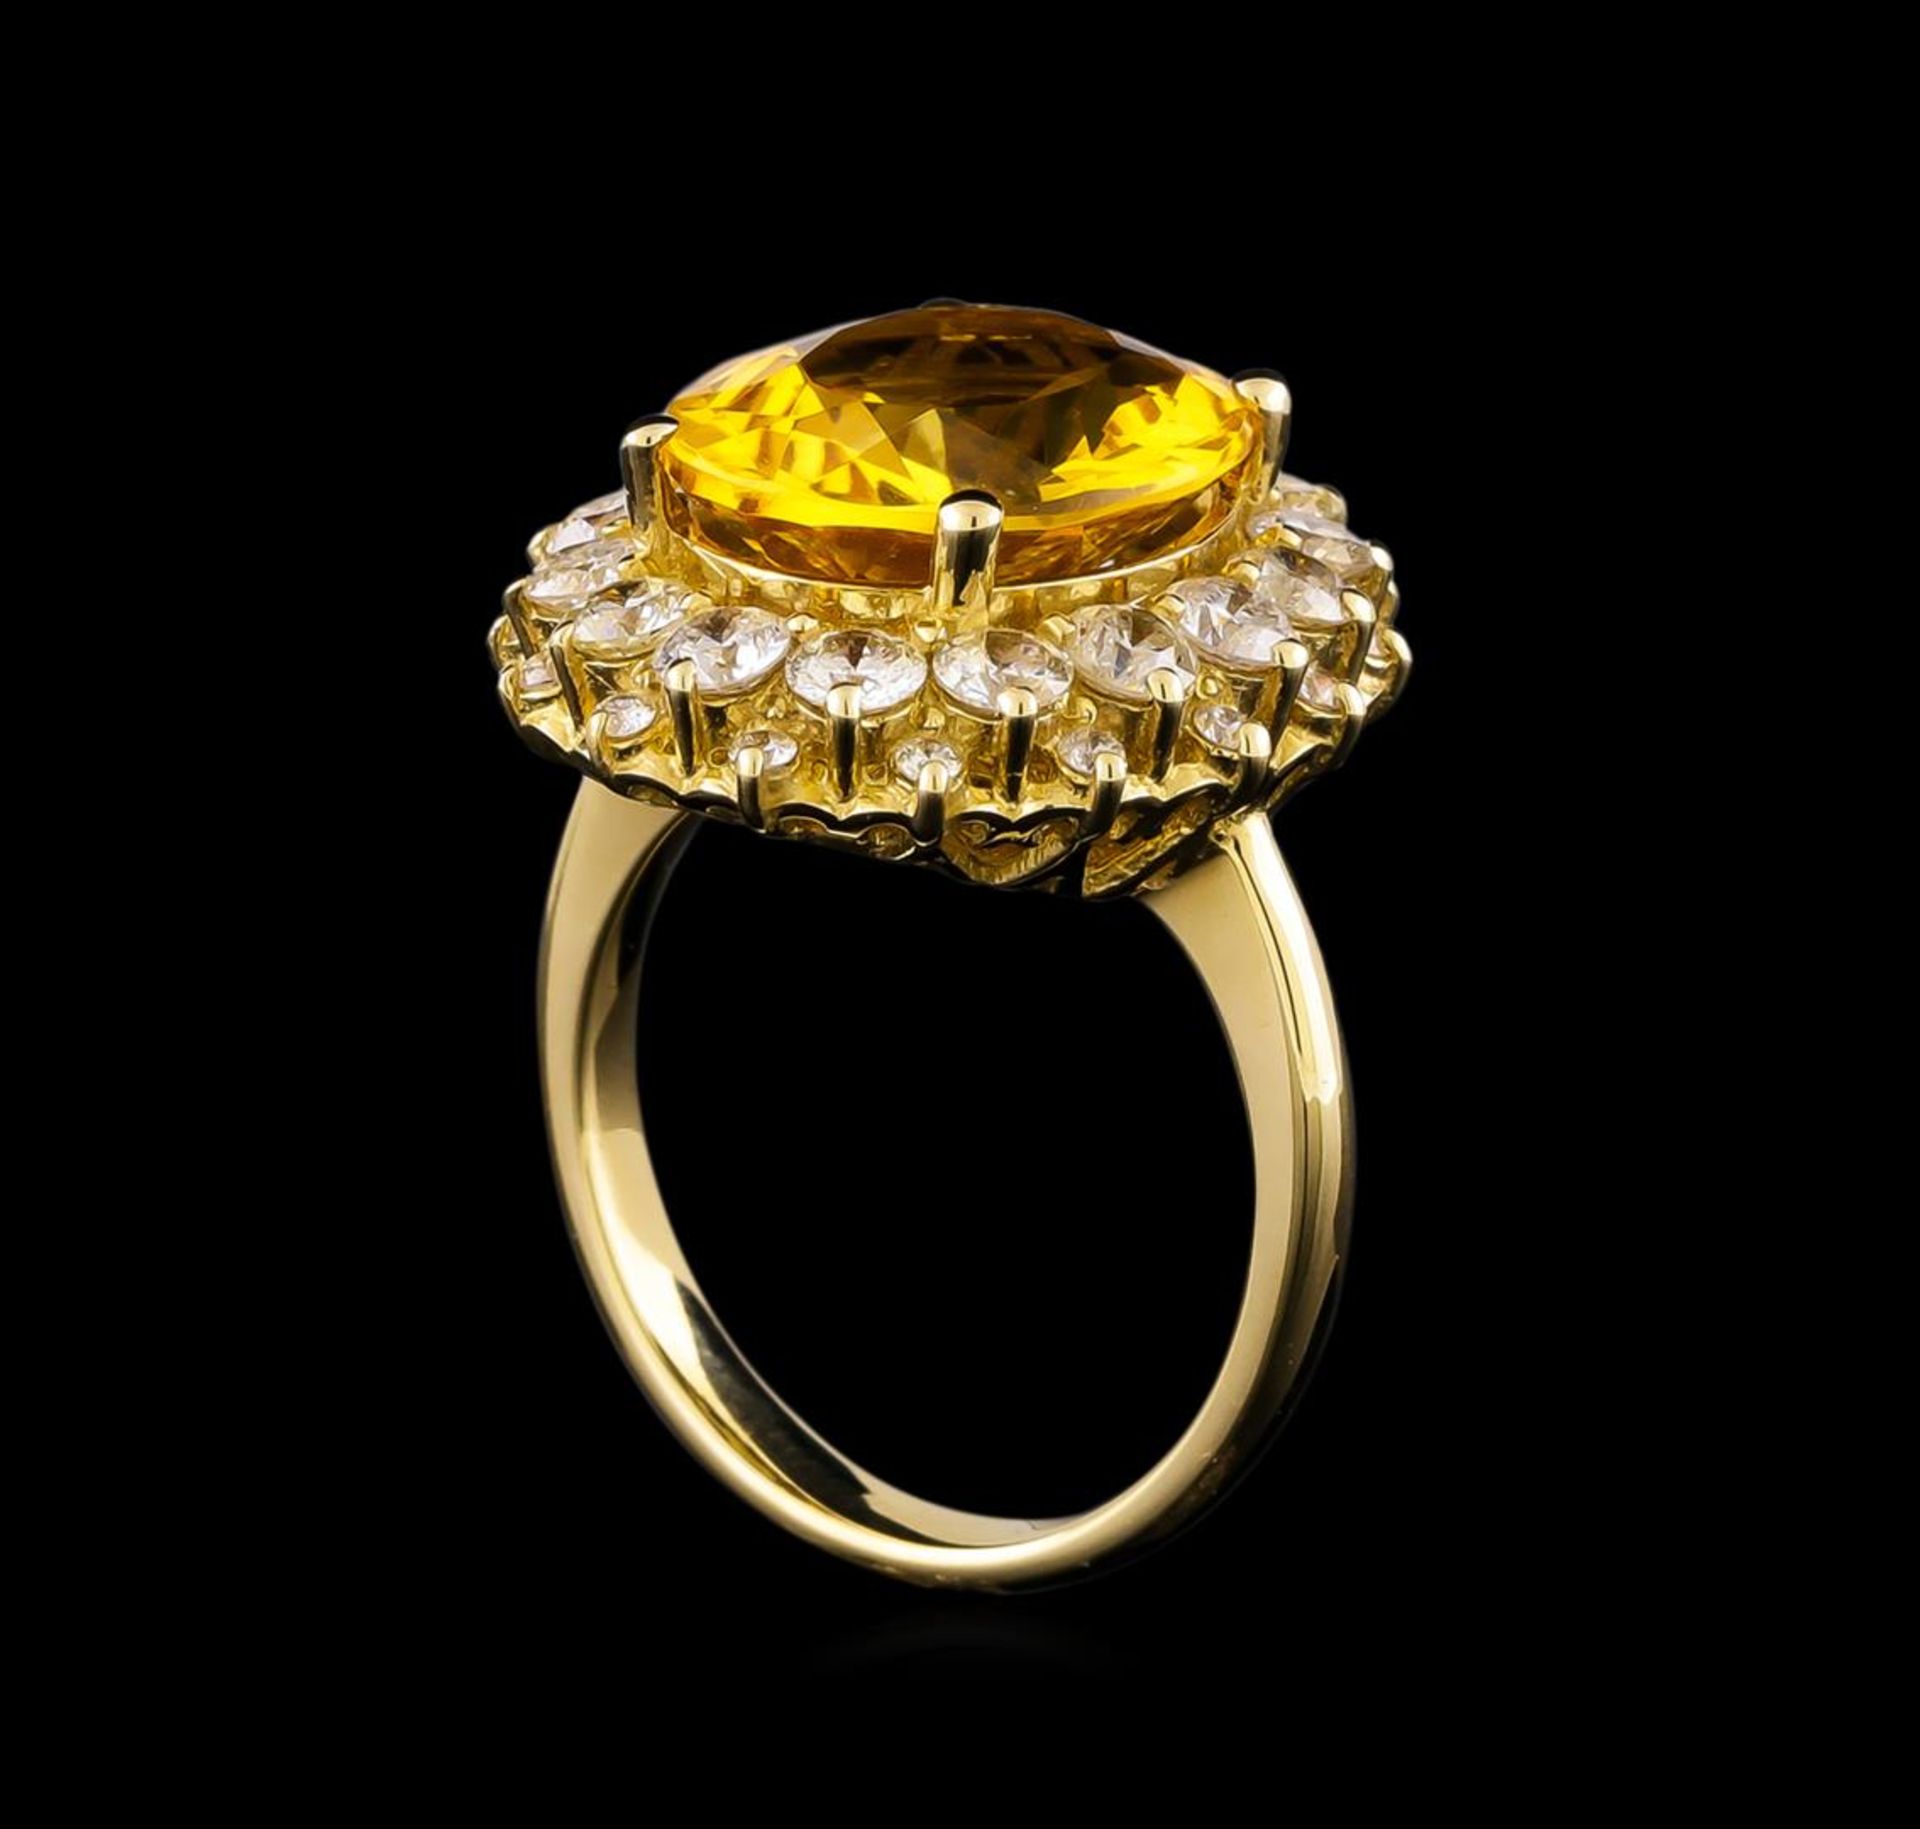 14KT Yellow Gold 6.17 ctw Citrine and Diamond Ring - Image 4 of 5